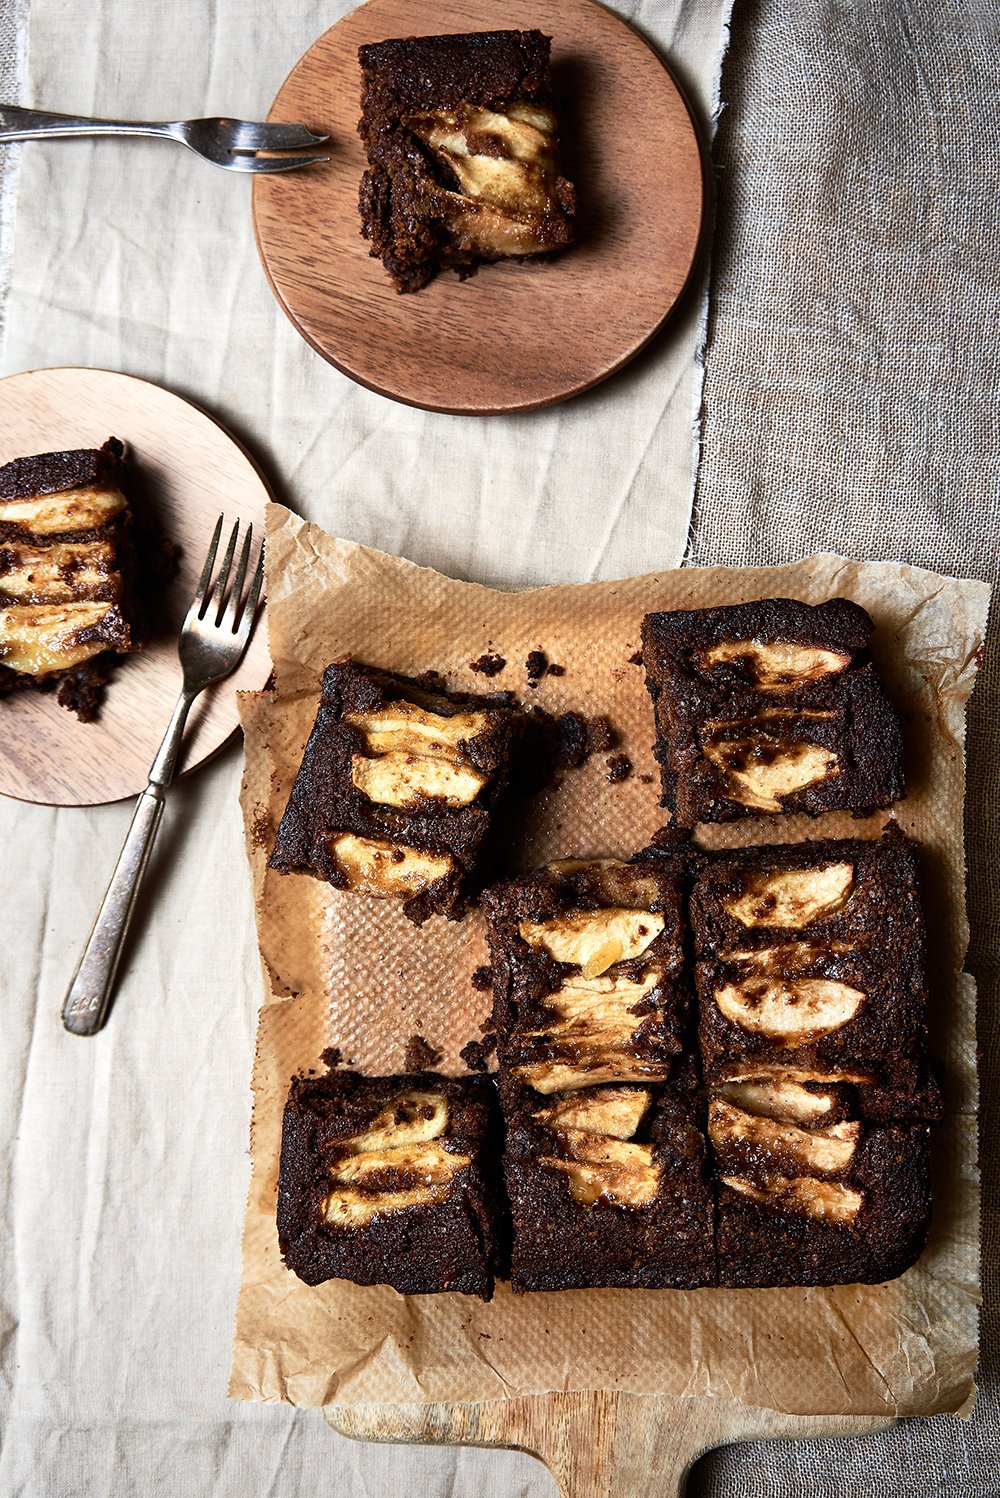 Ginger Apple & Chocolate traybake, photographed from above on plates and a wooden board